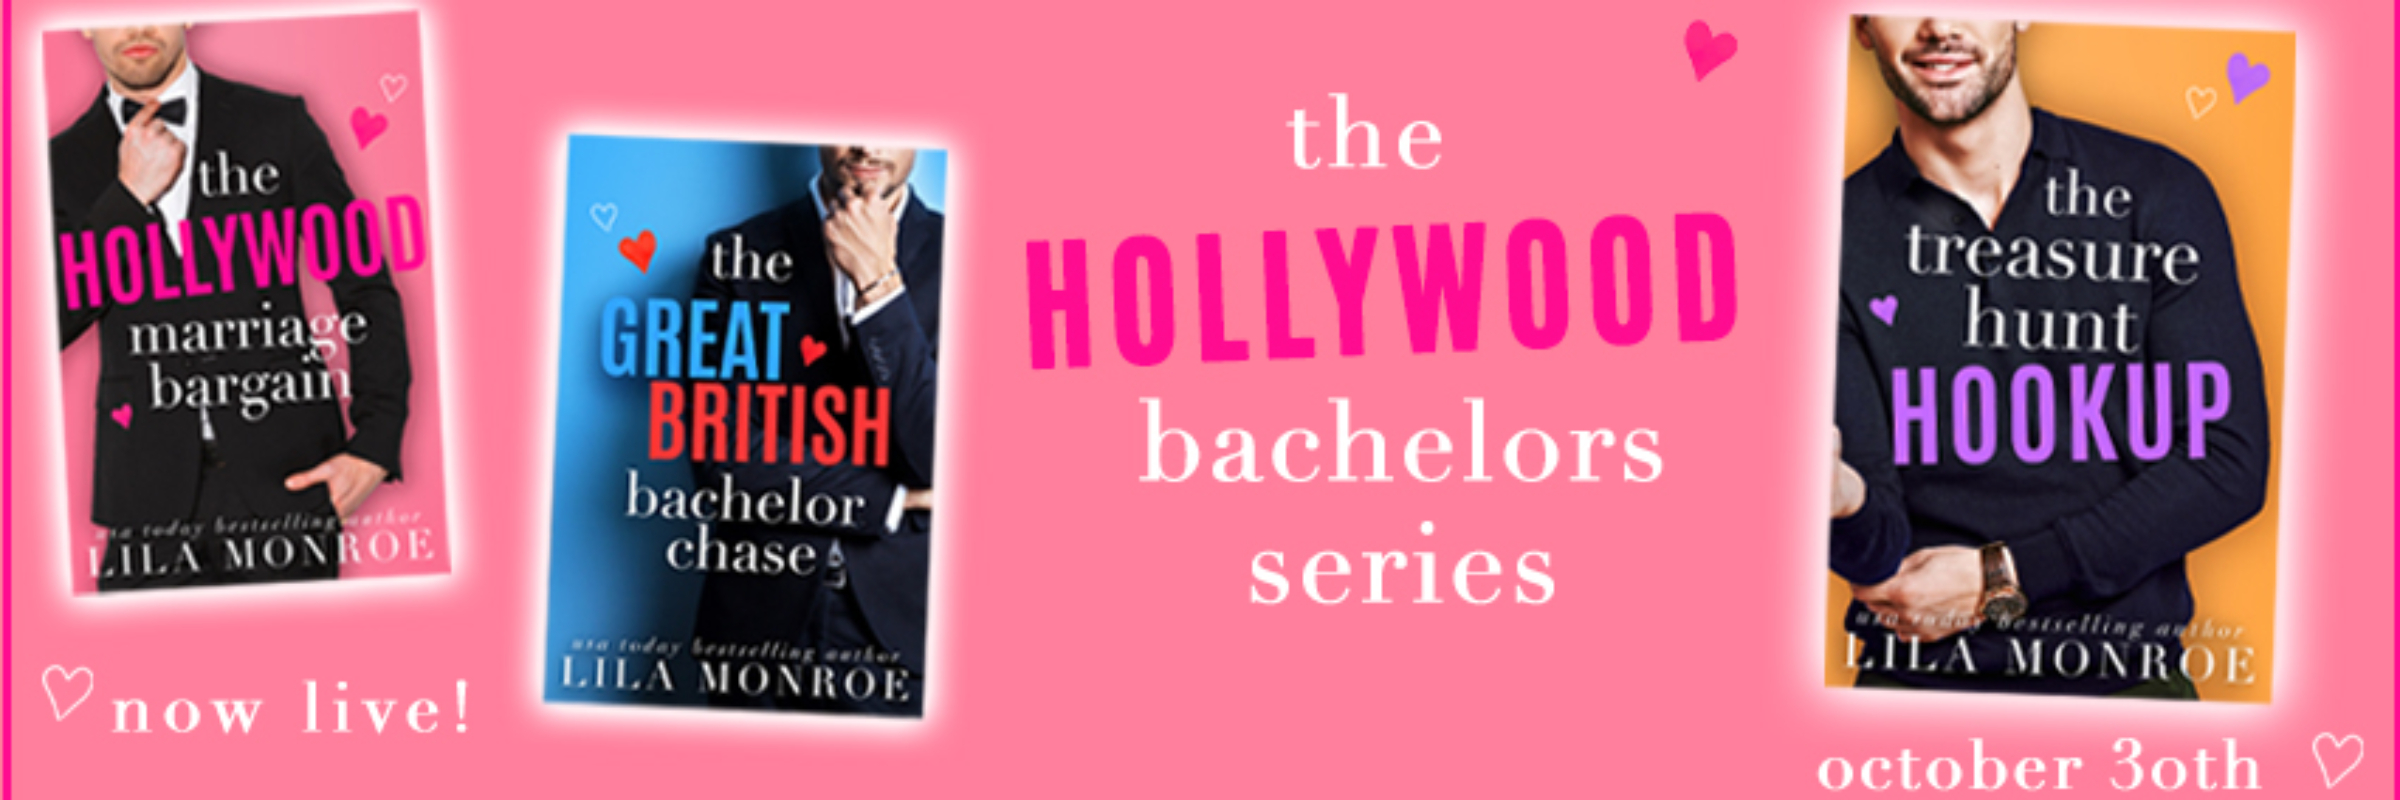 hollywood bachelors banner 3 titles oct